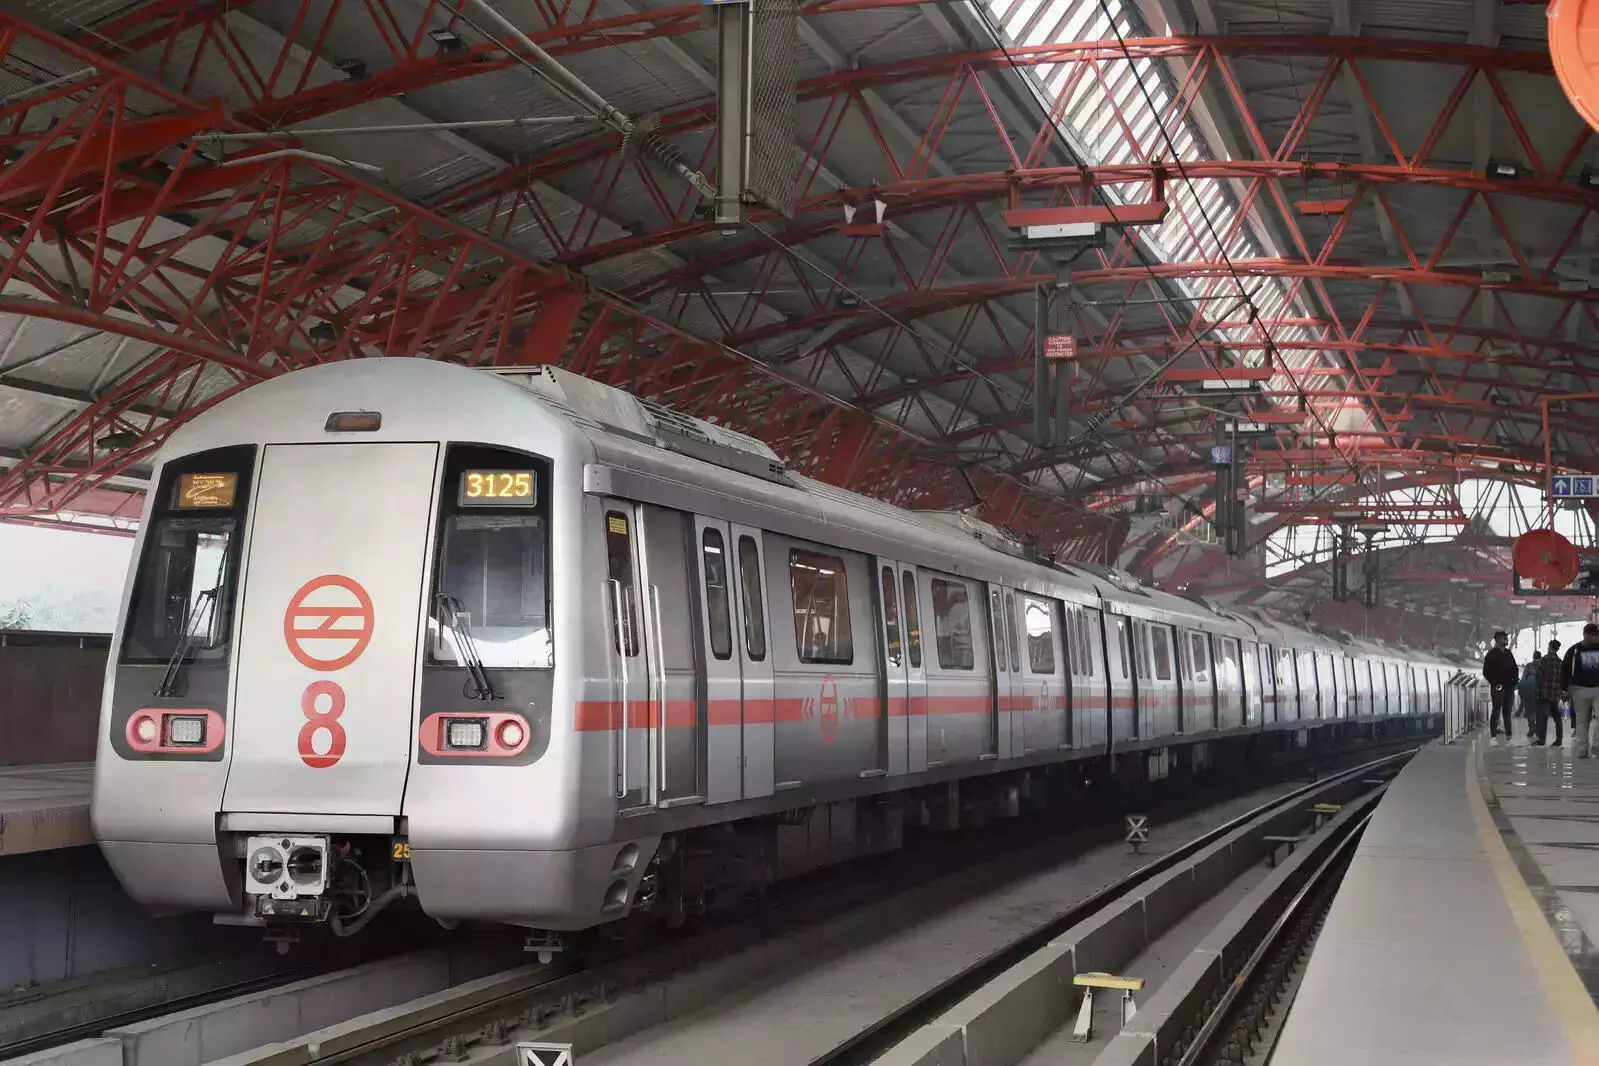 ‘No obscene activities’: Delhi metro tells commuters after viral video of couple kissing